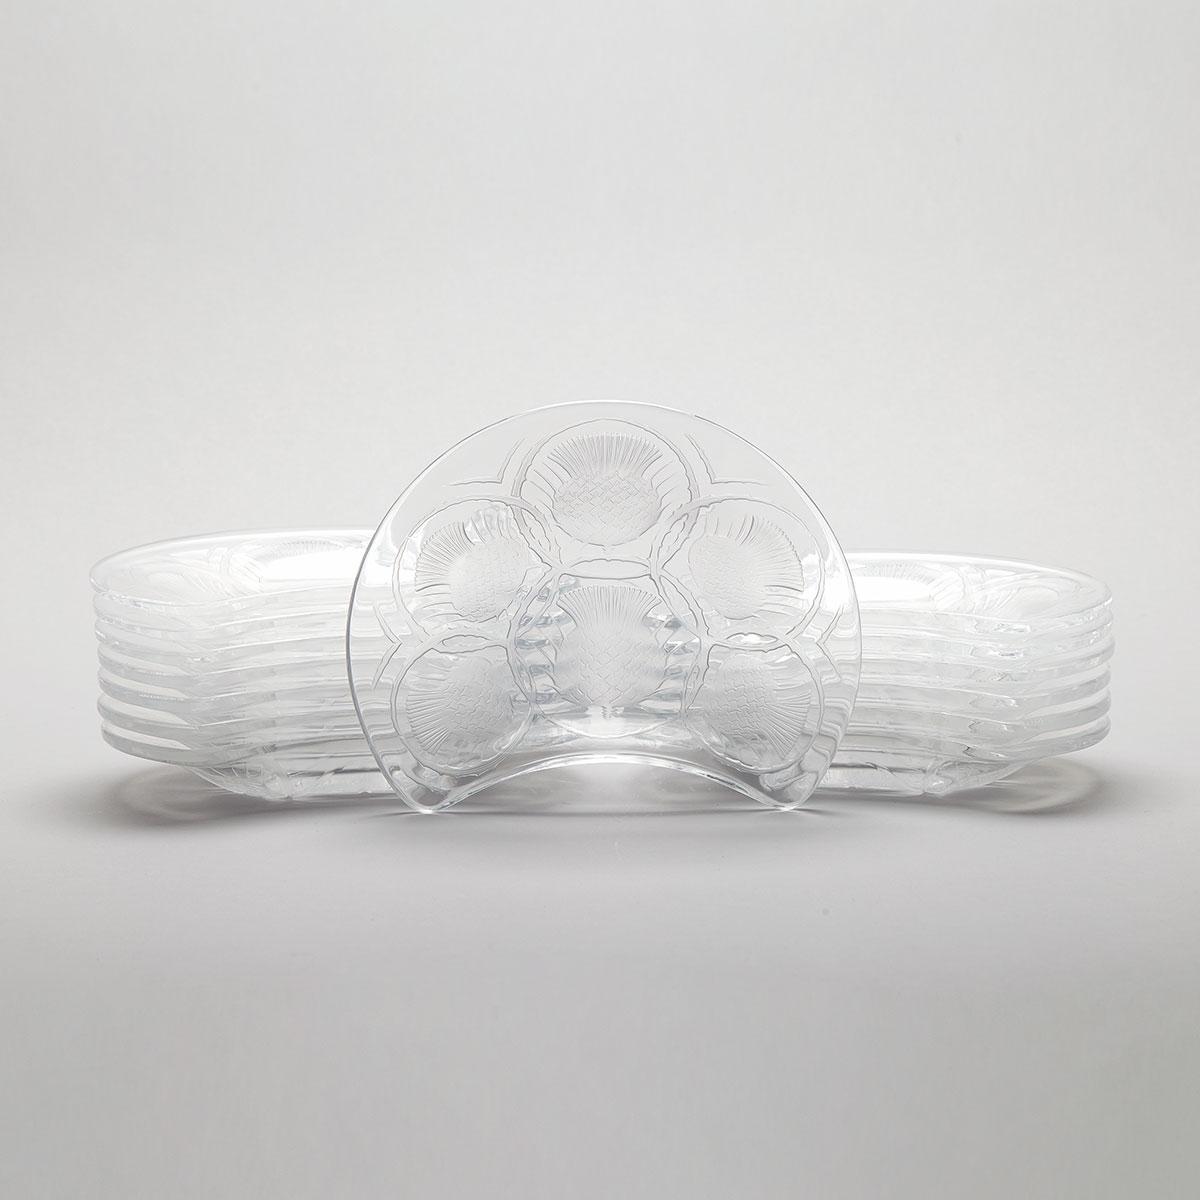 ‘Chardons’, Set of Twelve Lalique Moulded and Partly Frosted Glass Crescent Shaped Plates, post-1945